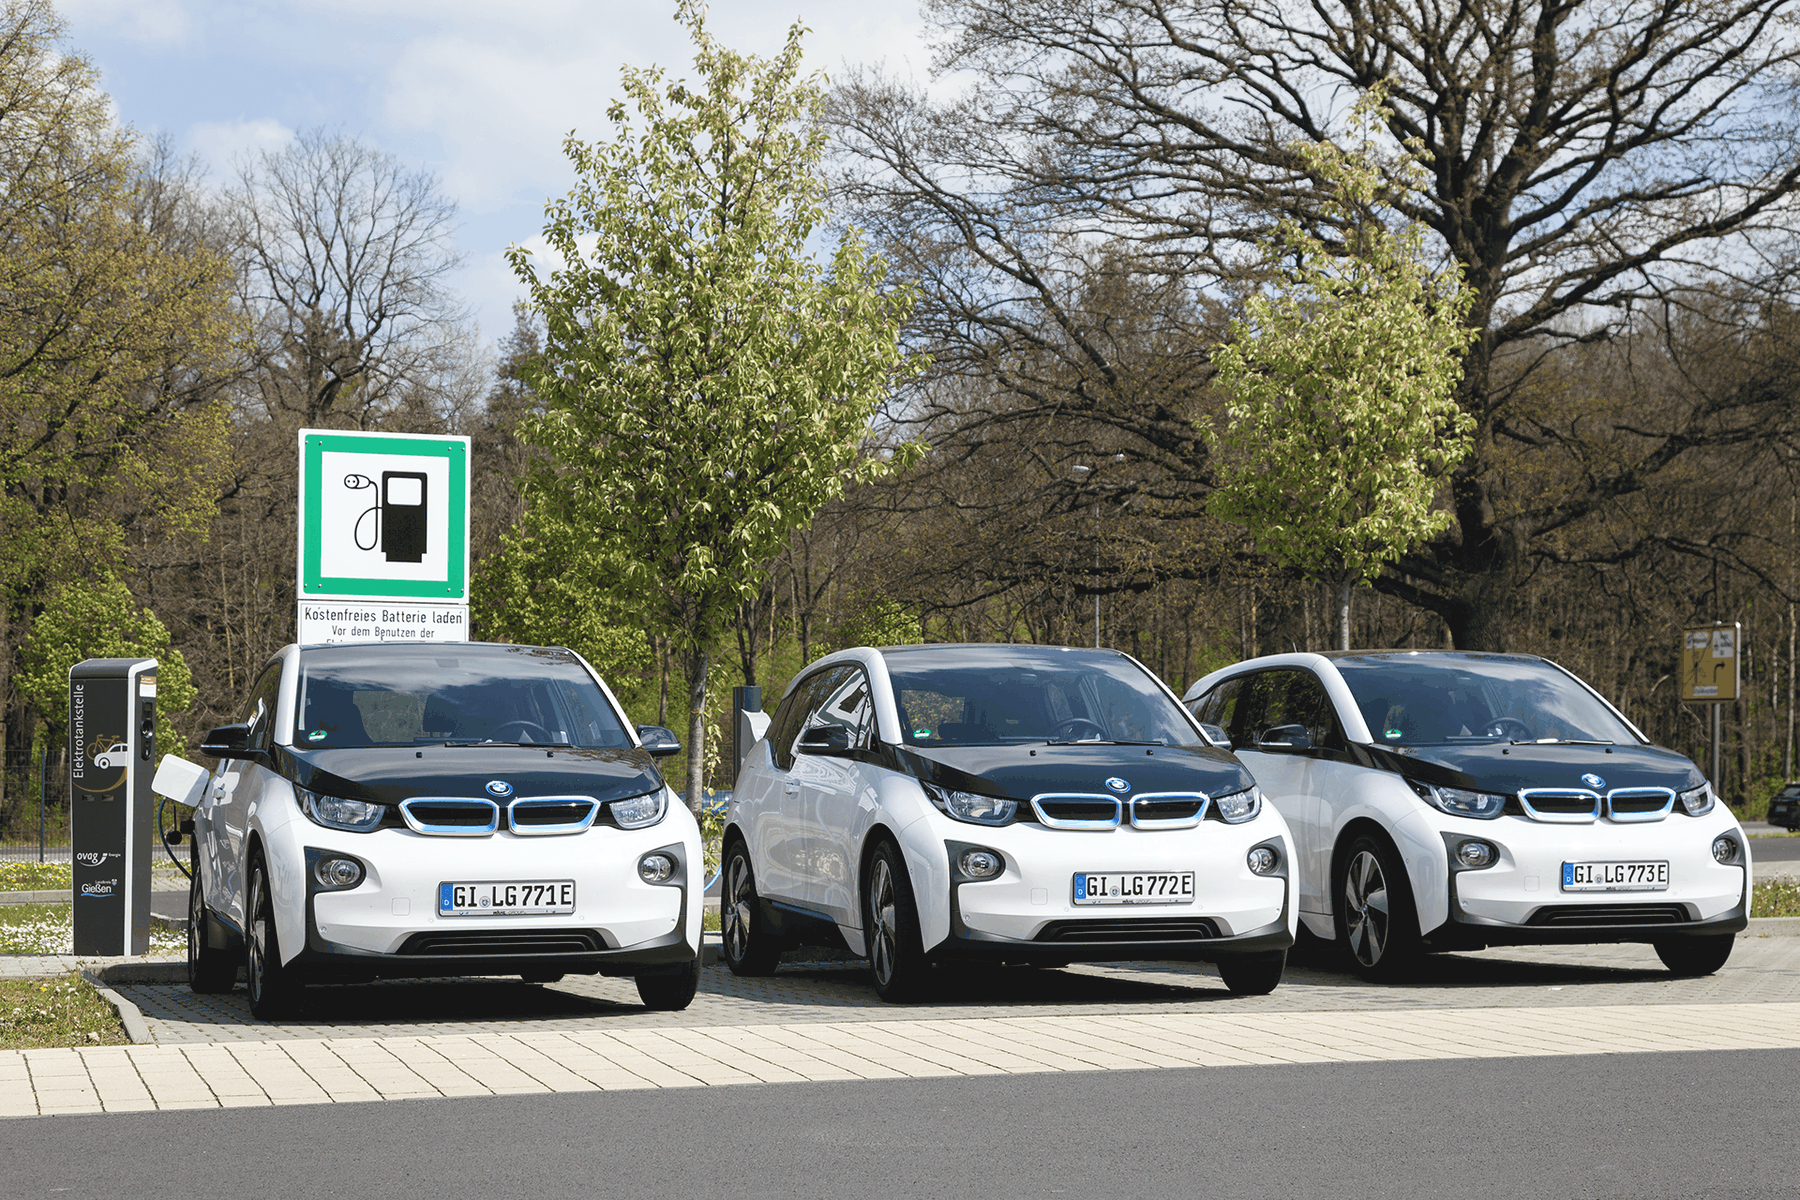 3 BMW cars parked in a line using an EV ChargePoint